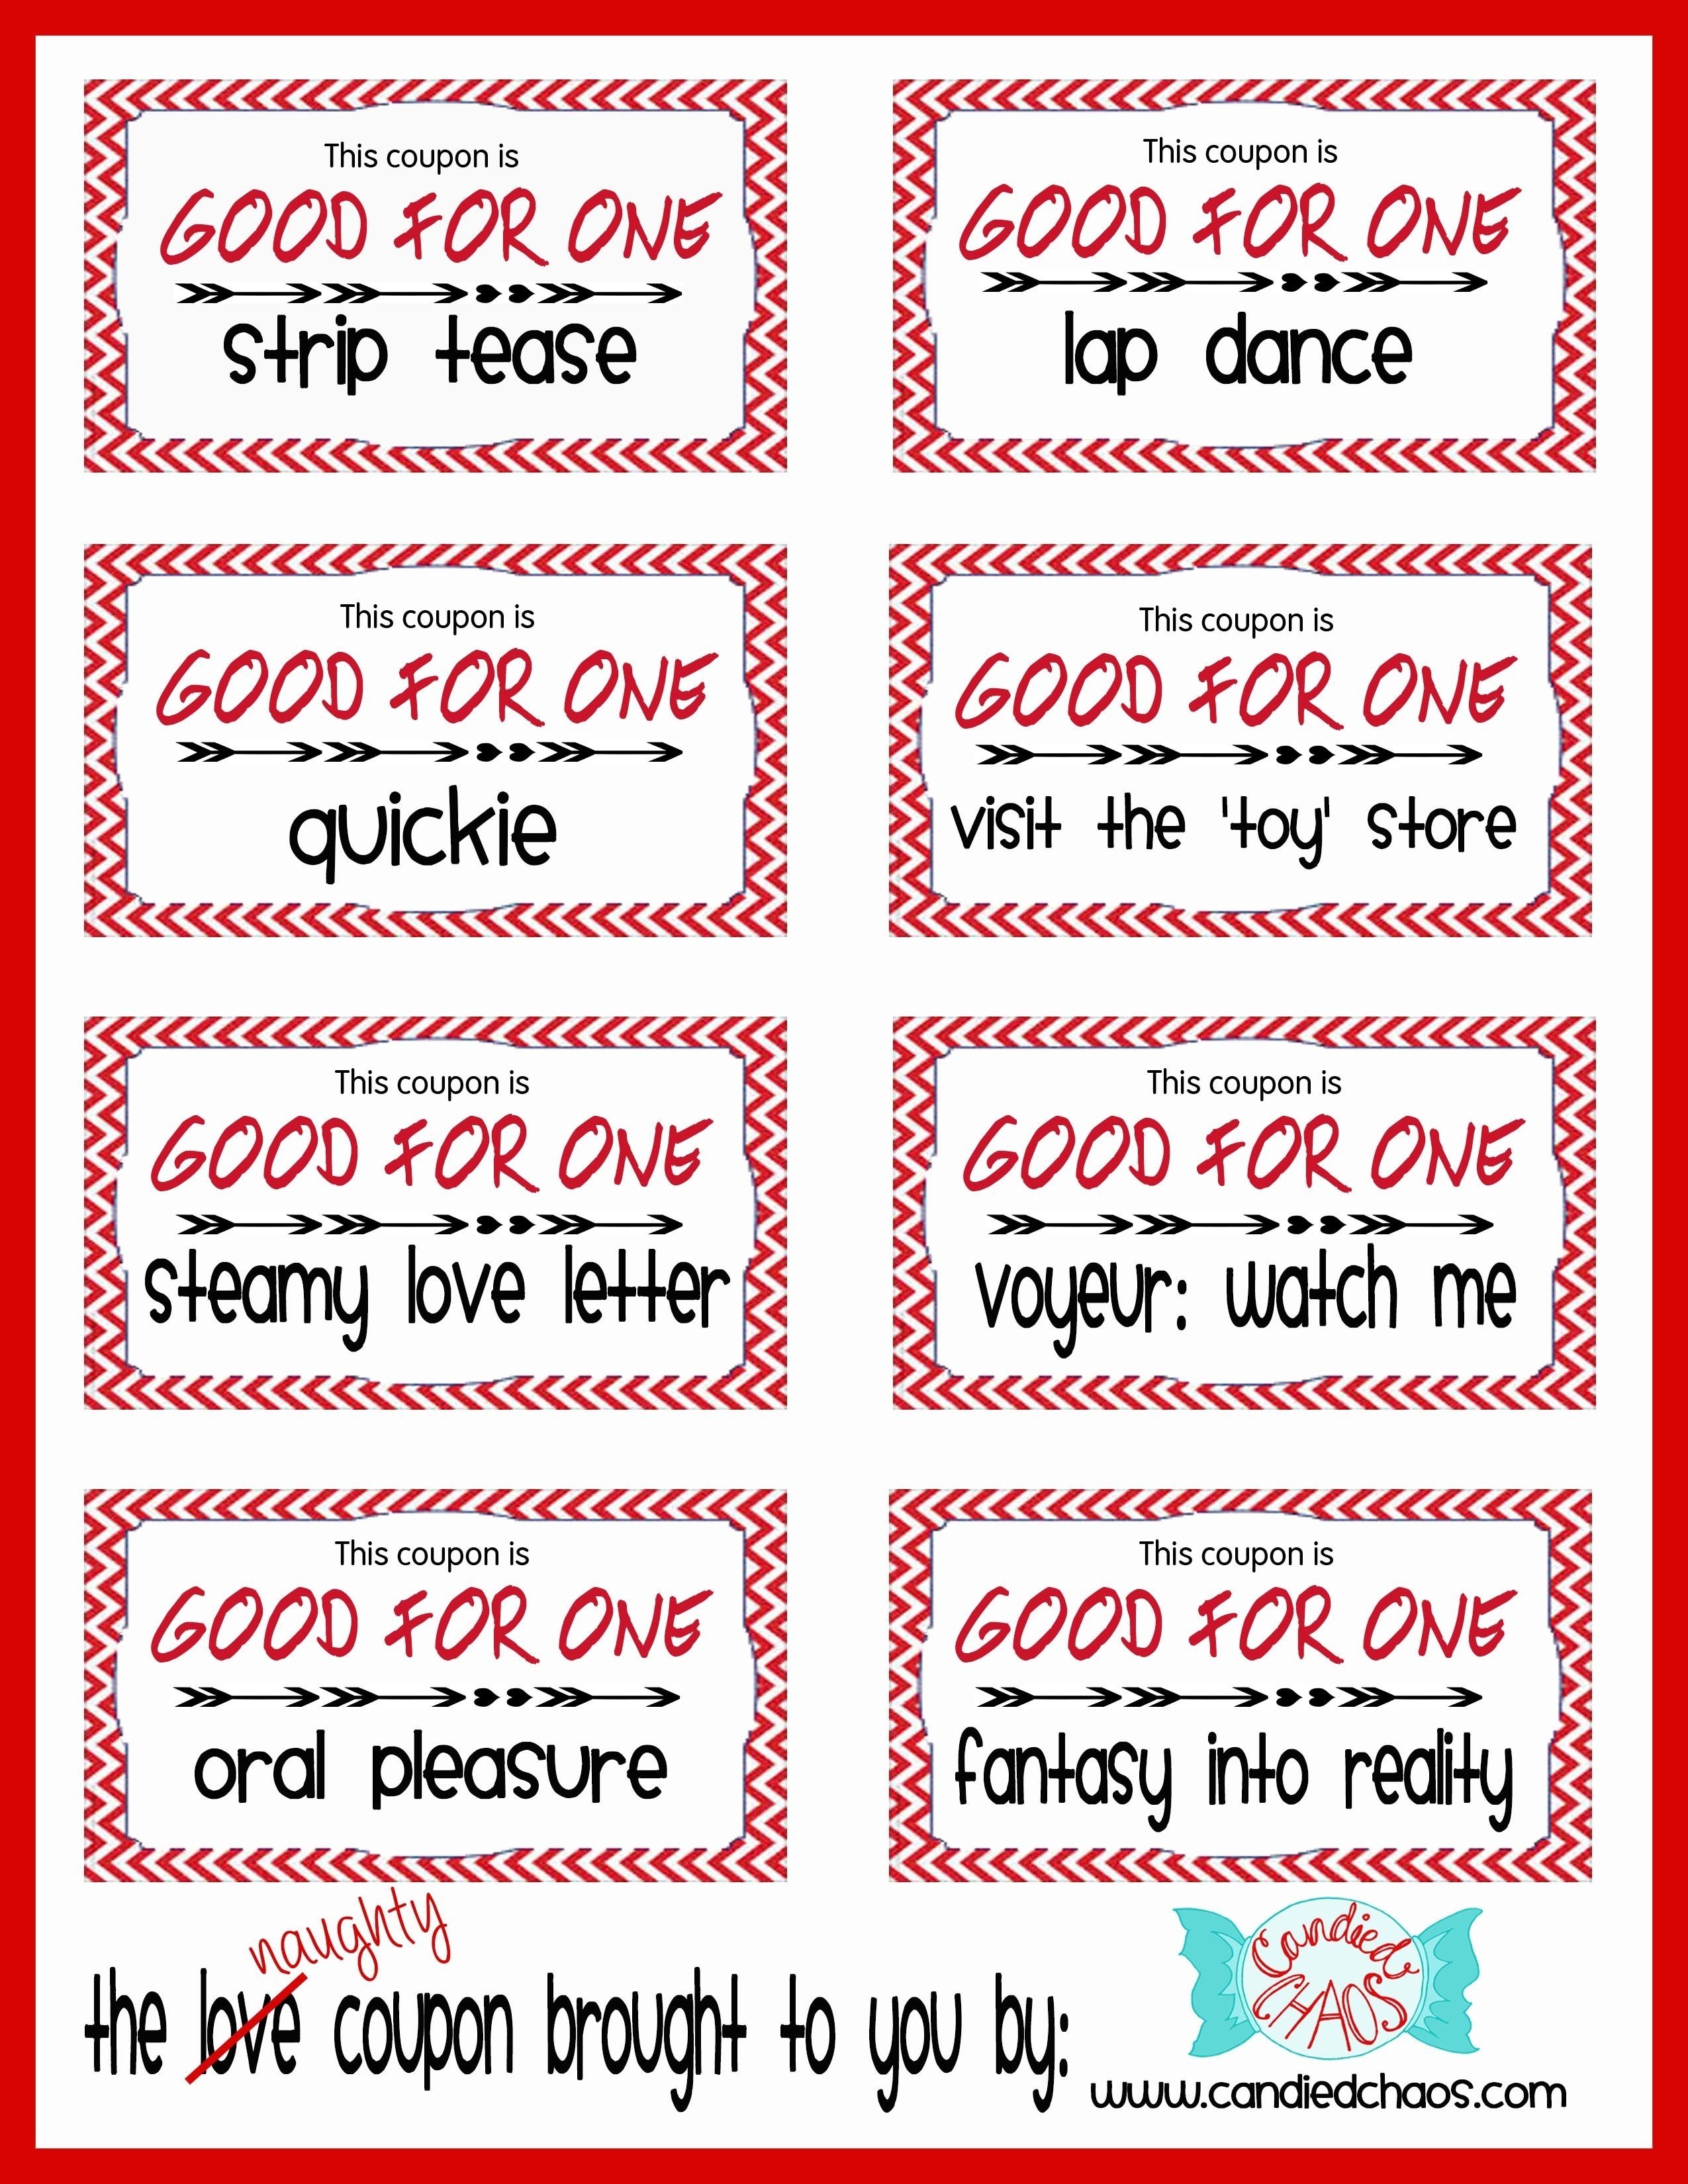 10-wonderful-coupon-book-ideas-for-girlfriend-2023